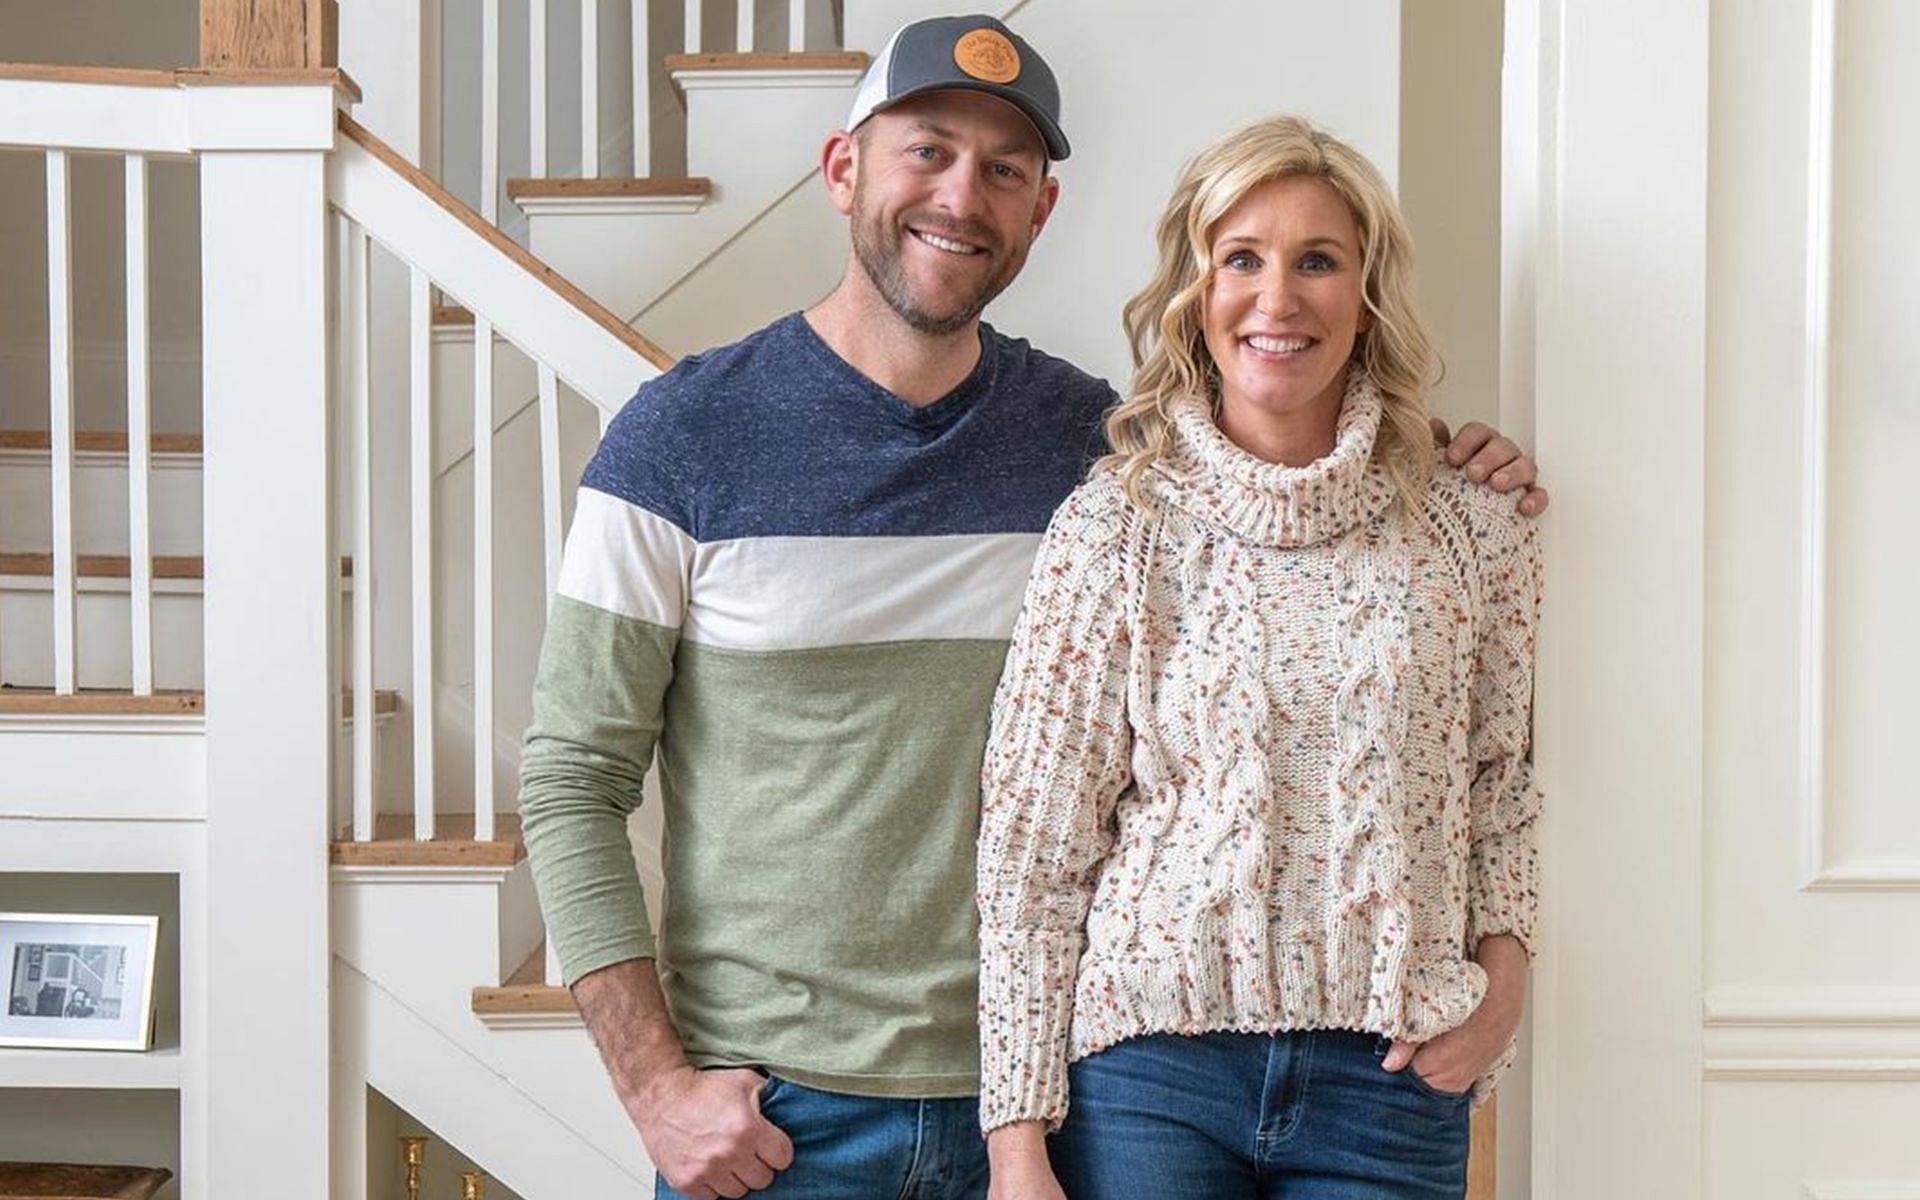 Fixer to Fabulous: Welcome Inn airs on March 15 on HGTV (Image via jennymarrs/Instagram)